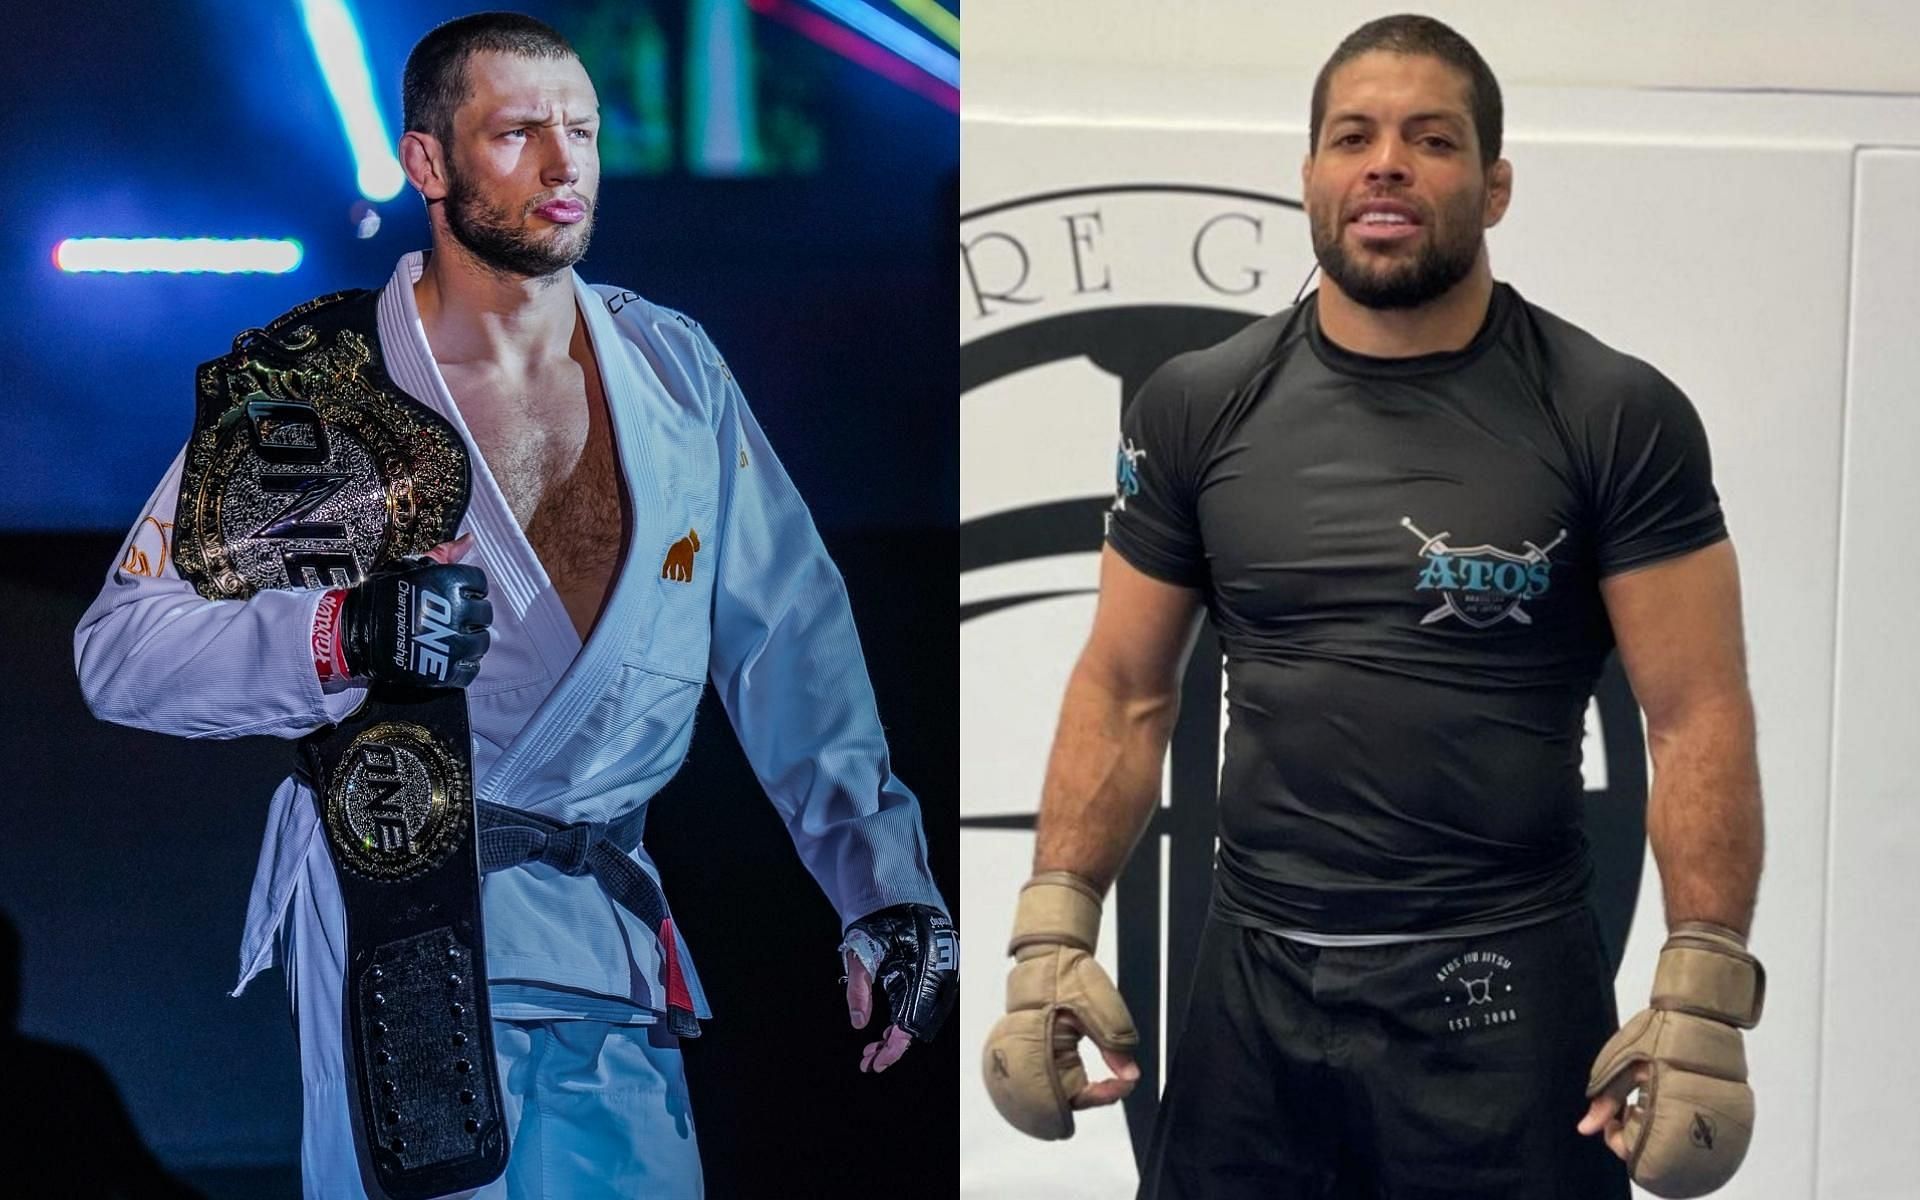 Andre Galvao (left) has a message for his ONE X foe Reinier de Ridder (right) [Images courtesy of ONE Championship]